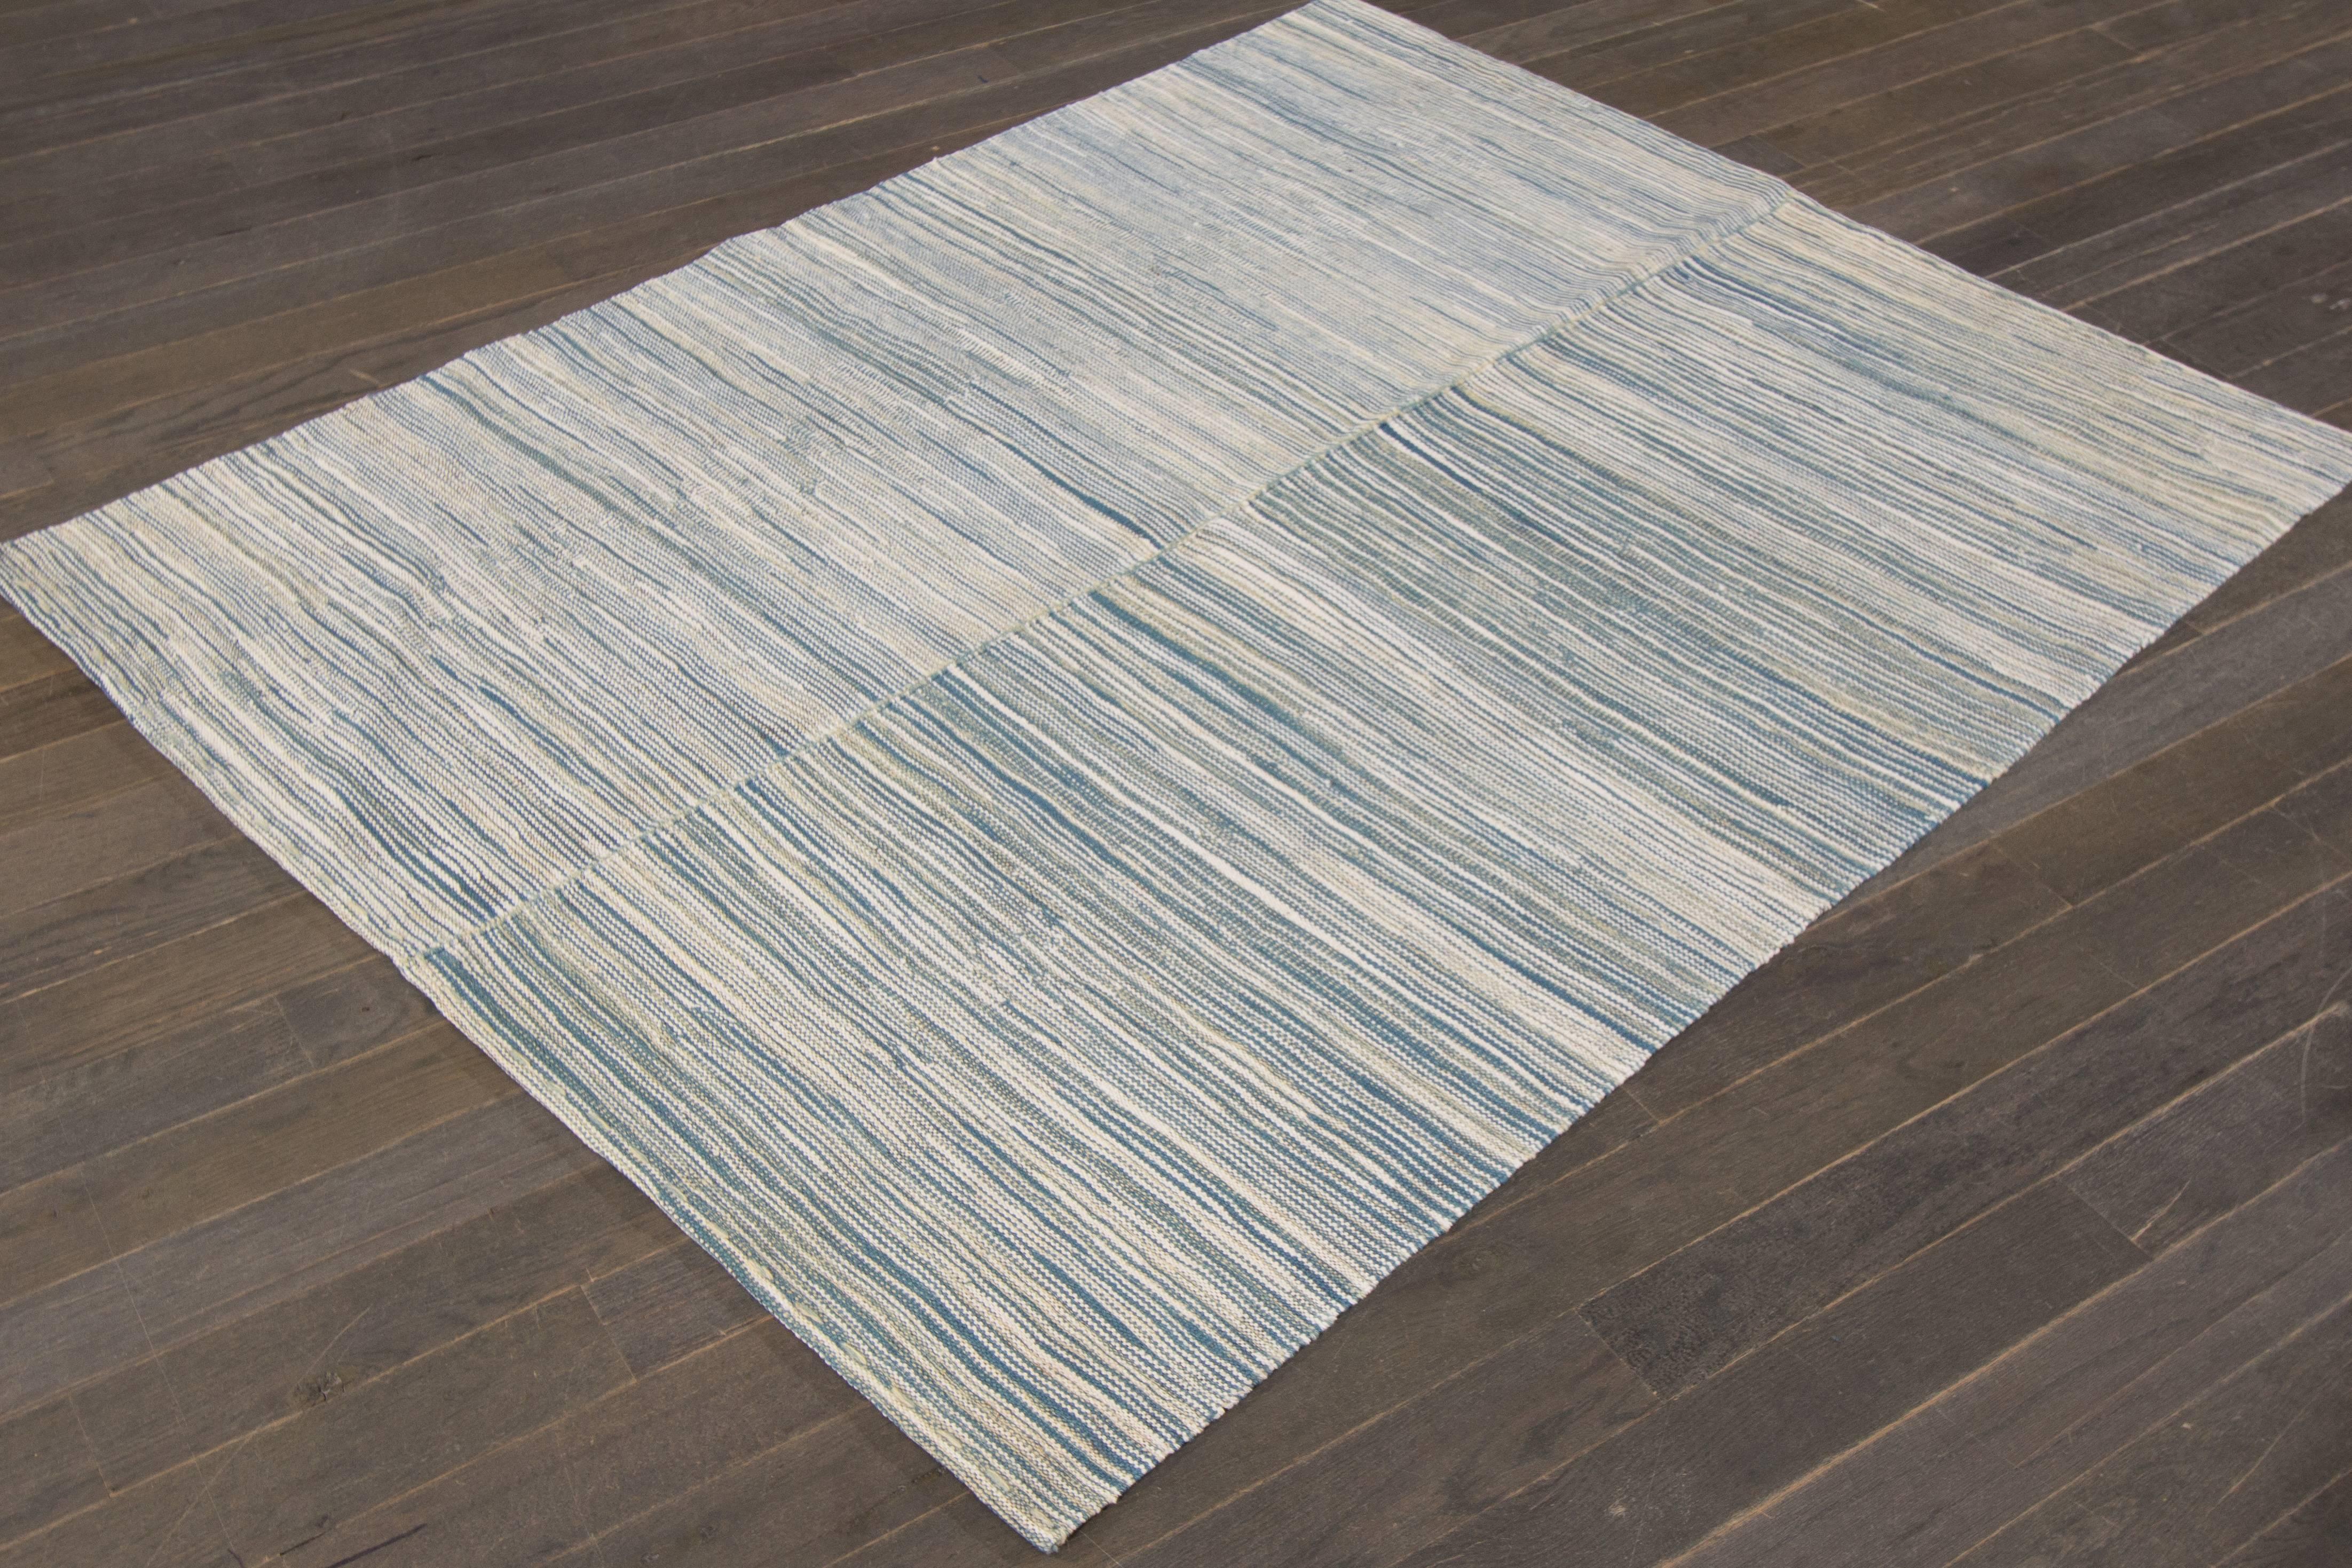 21st century contemporary Turkish Kilim rug with an all-over pale blue and ivory textured field. Measures 4.01x5.02.